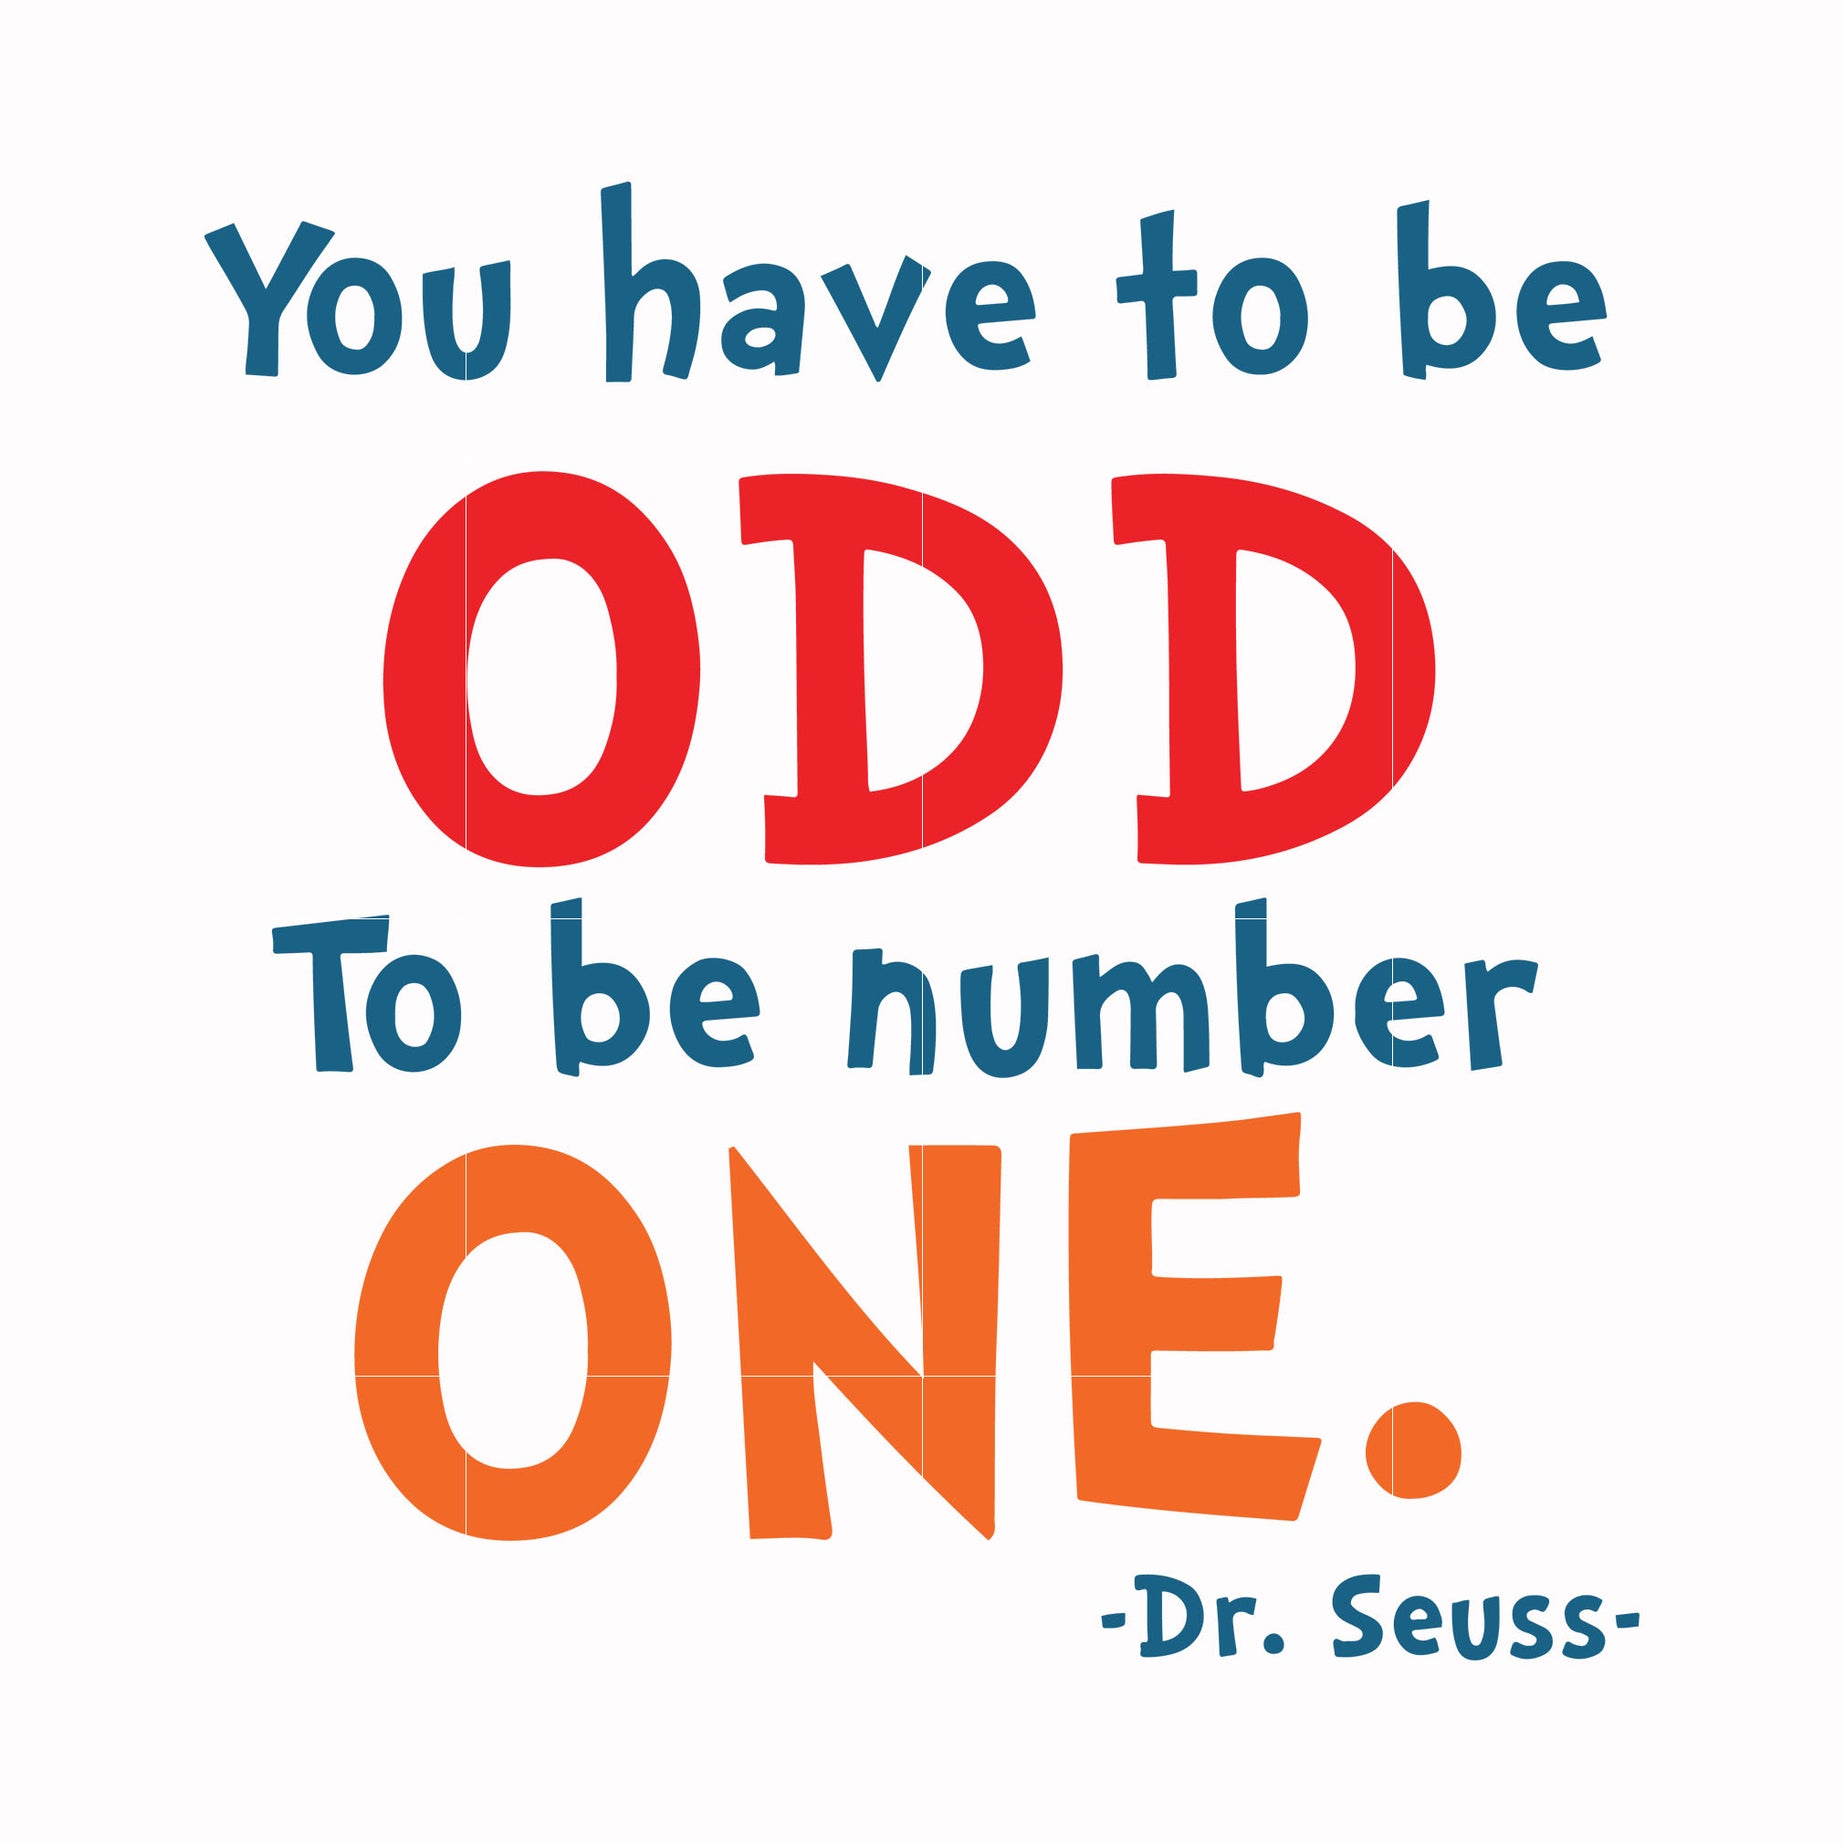 You have to be odd to be number one svg, png, dxf, eps file DR00092